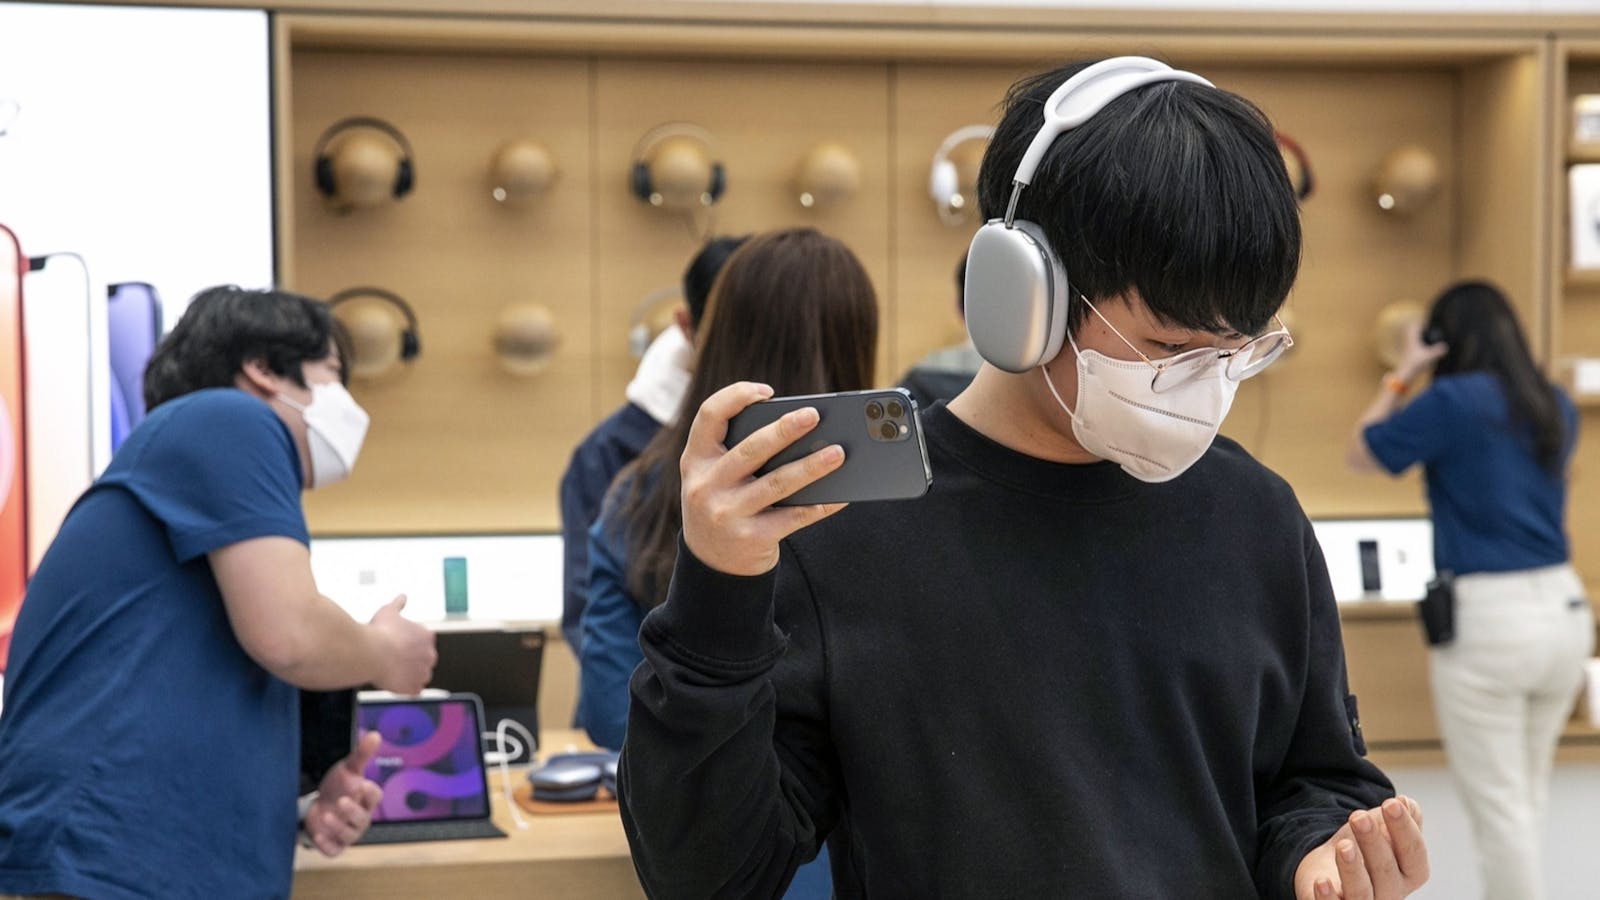 A customer wearing a pair of AirPods Max headphones at an Apple store in South Korea. Photo by Bloomberg